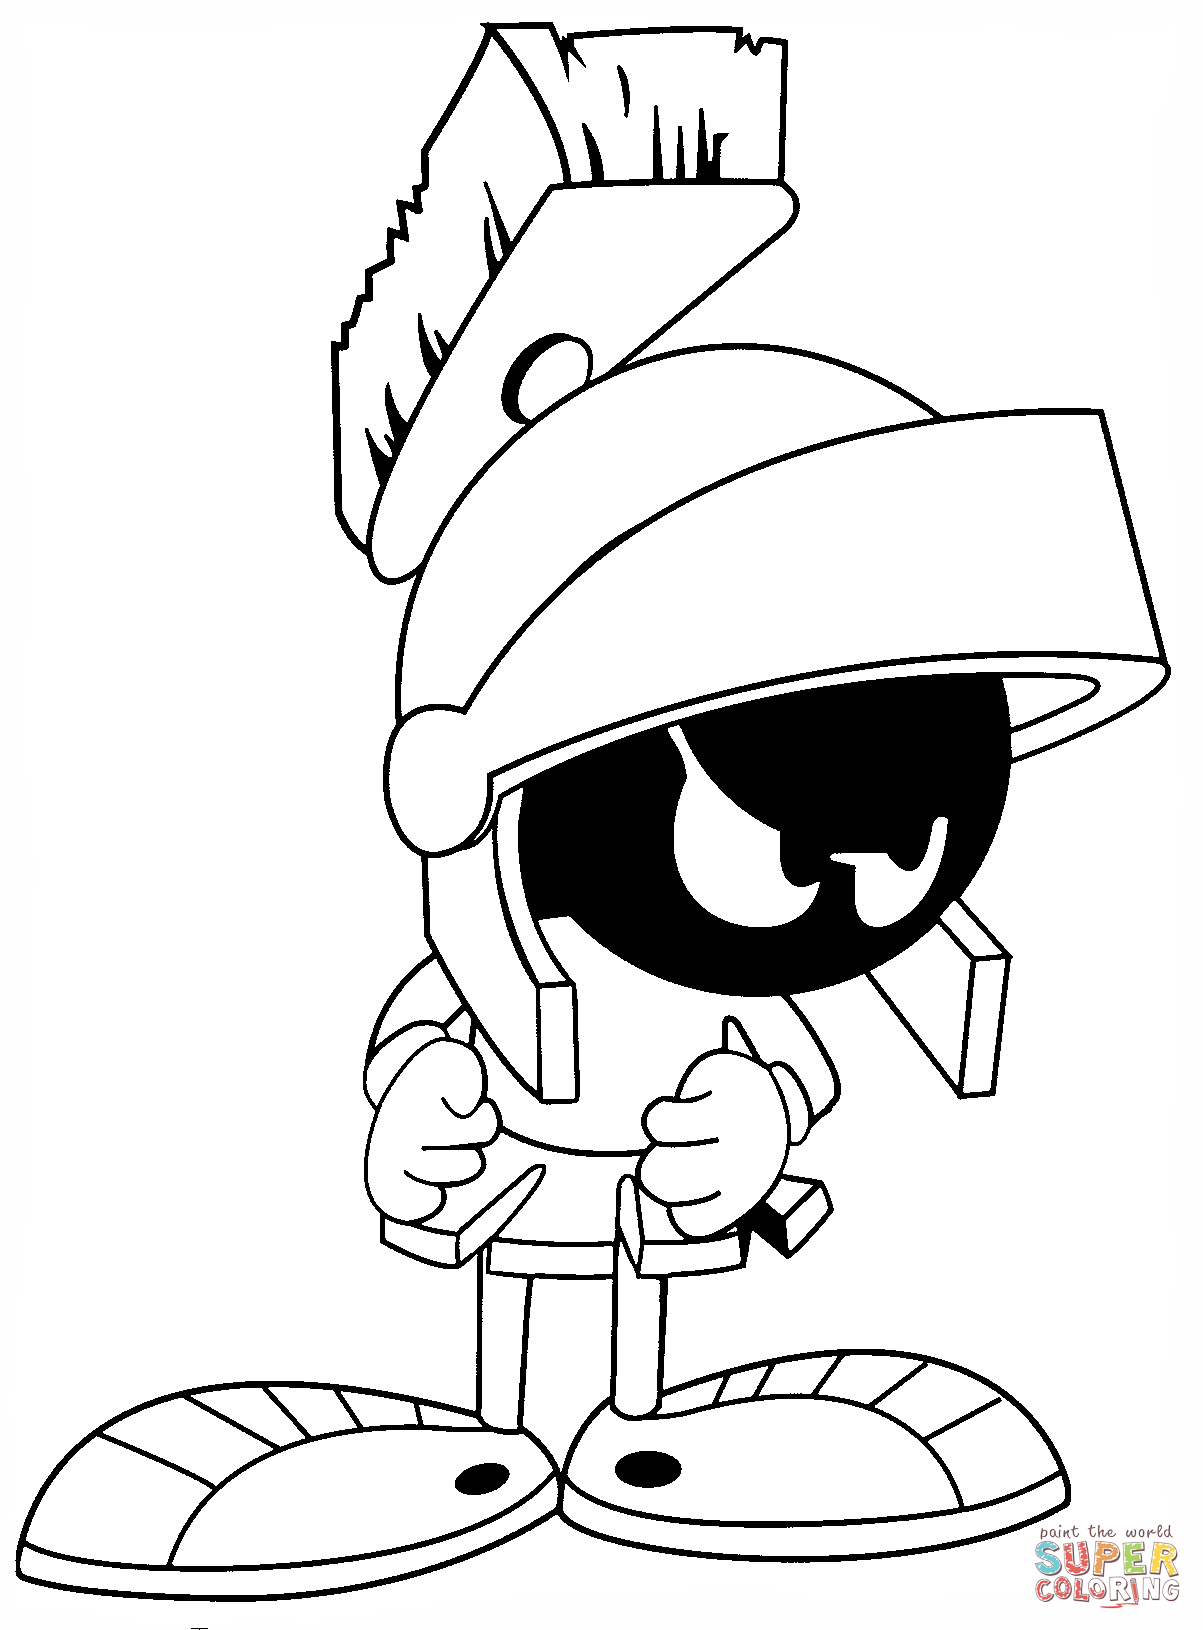 Elmer Fudd Coloring Pages Looney Tunes Elmer Fudd Coloring Page Free Printable Coloring Pages